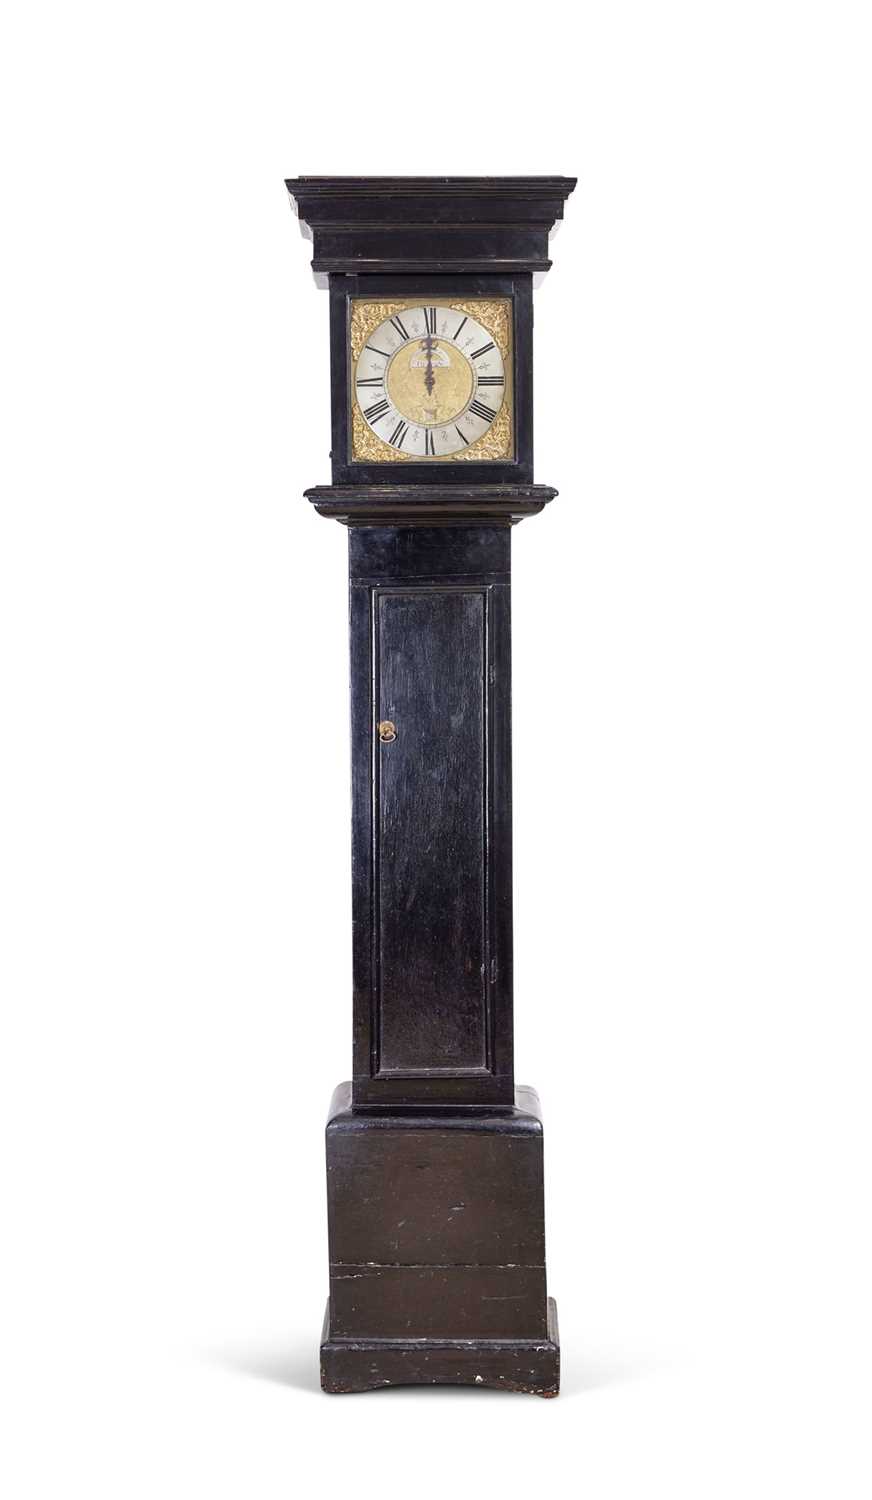 A QUEEN ANNE PERIOD EBONISED LONGCASE CLOCK SIGNED SAMUEL HENRY SMITH, LONDON